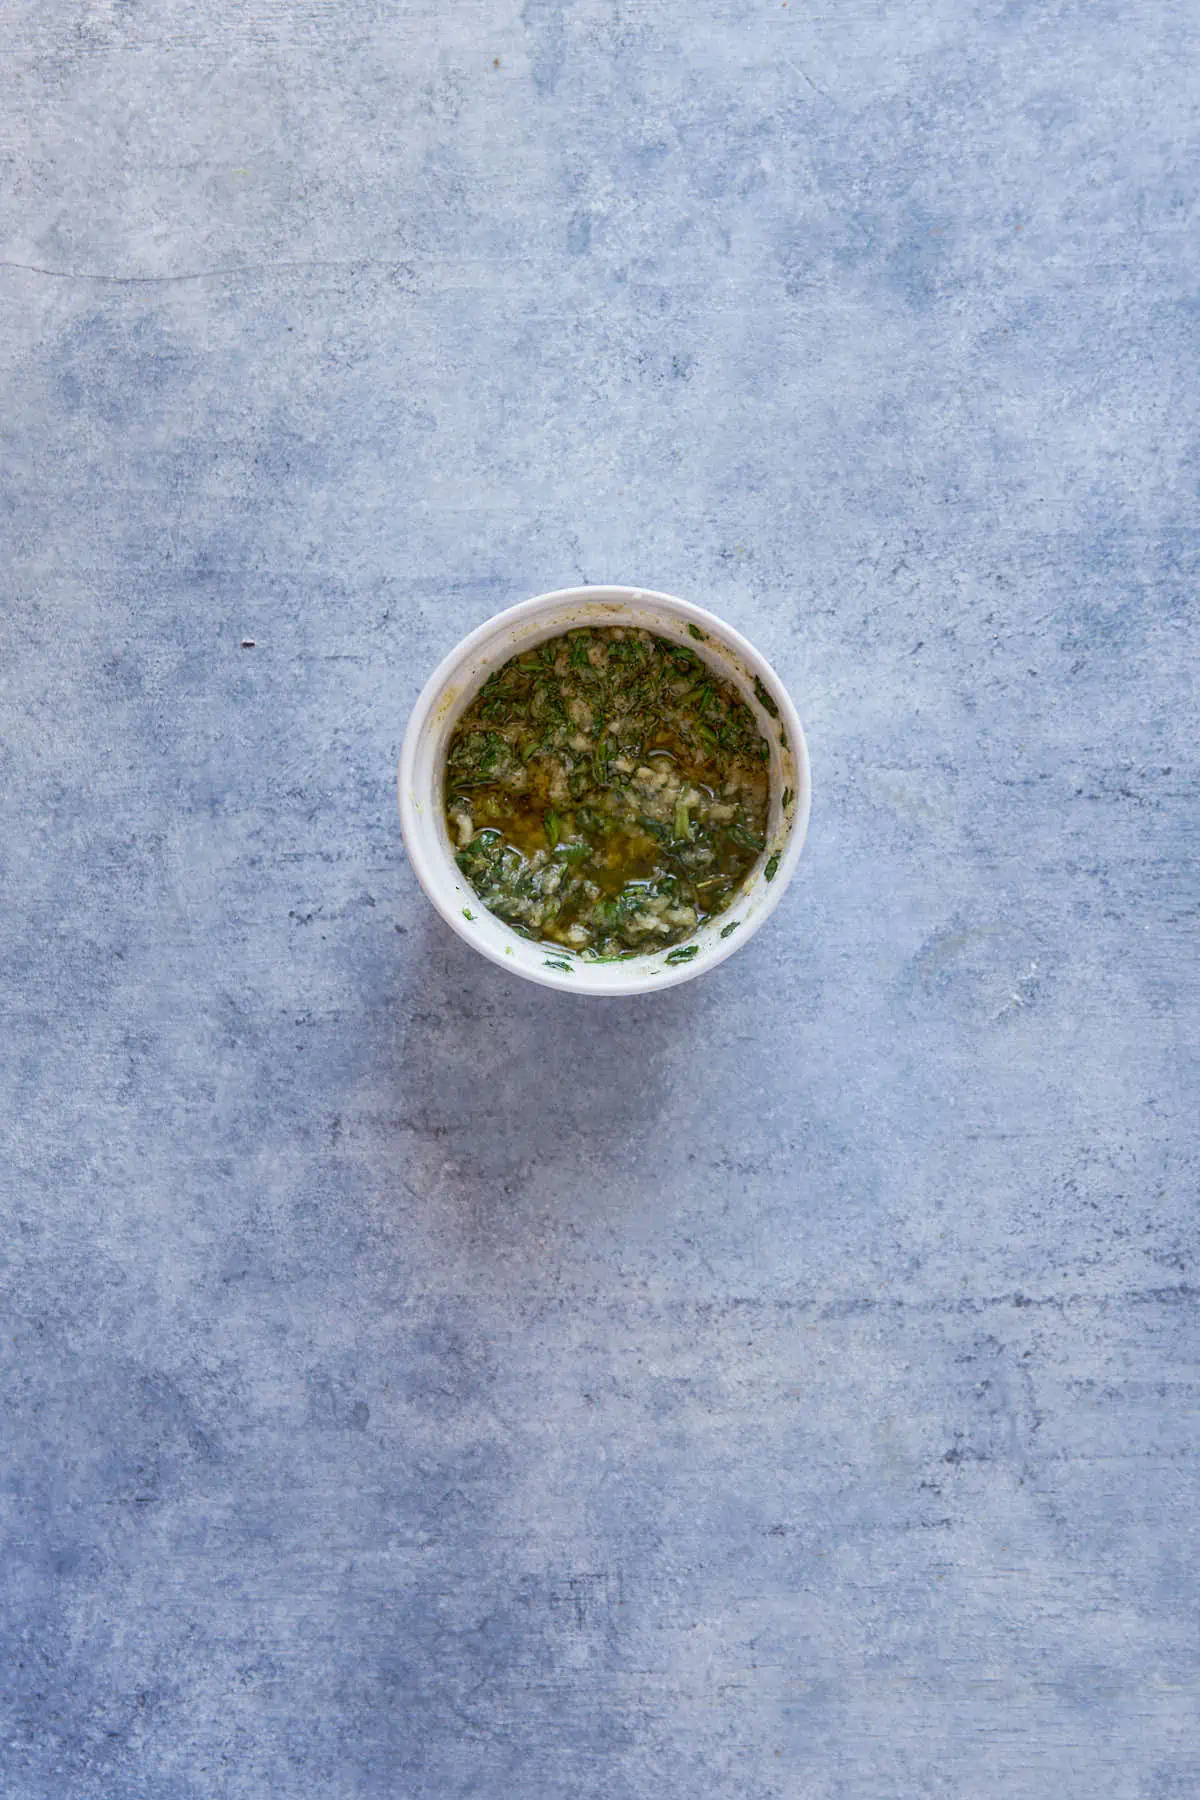 Mixing the herbs in a small bowl.